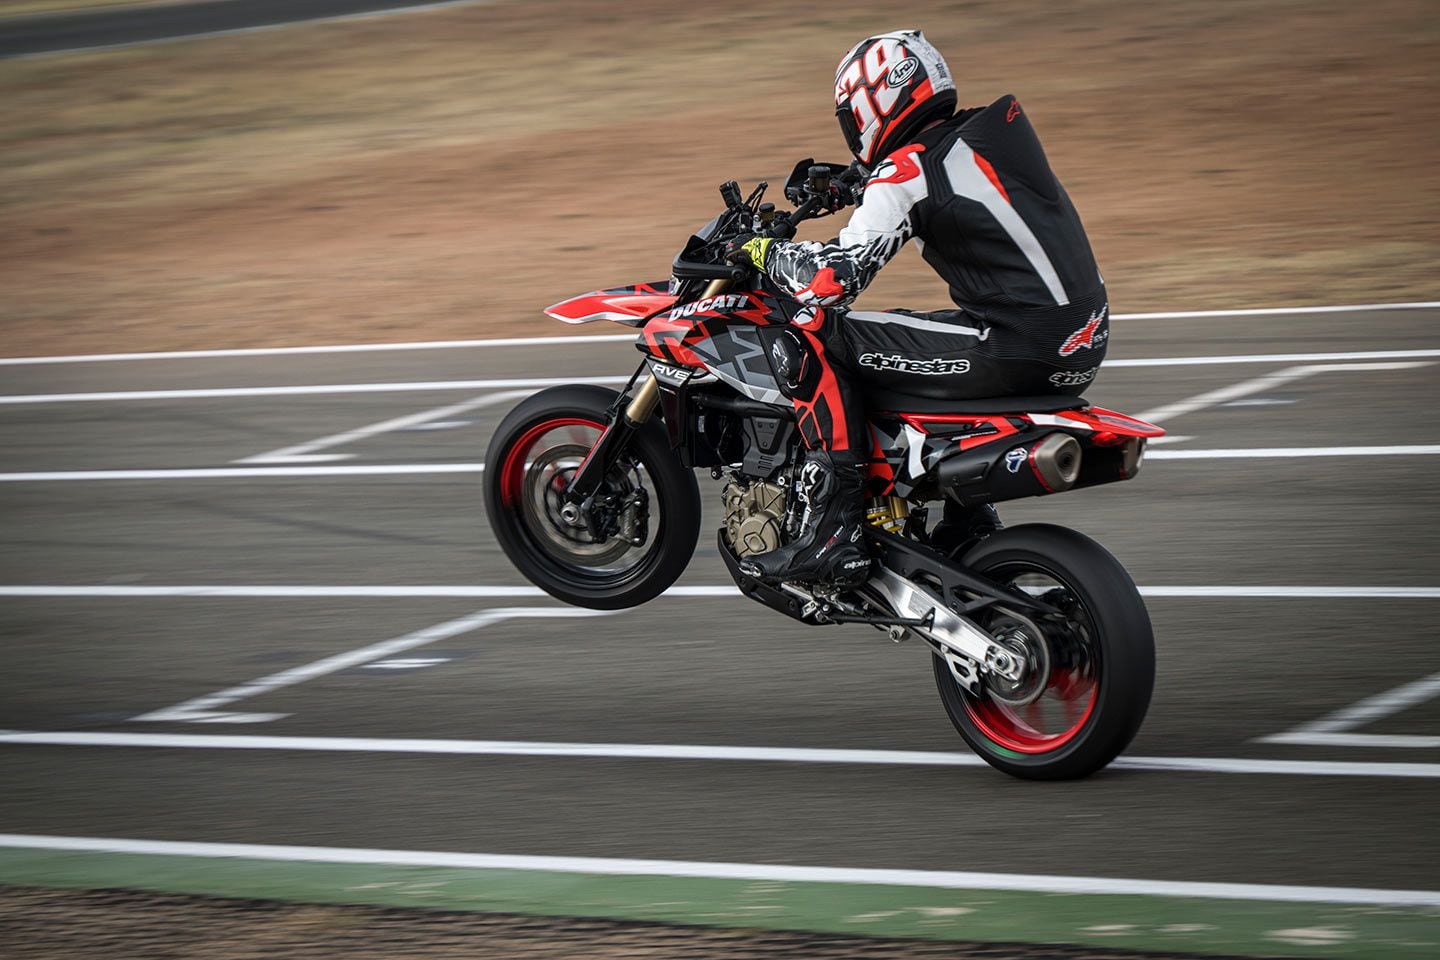 How does a claimed 77.5 hp and 333 pounds wet, no fuel look on a track? Like this—a lot! <i>CW</i> staffer Bradley Adams tests the production Hypermotard 698 Mono RVE at a kart track in Spain. Read his <a href="https://www.cycleworld.com/motorcycle-reviews/ducati-hypermotard-698-mono-first-ride-review/" target="_blank">full review here</a>.